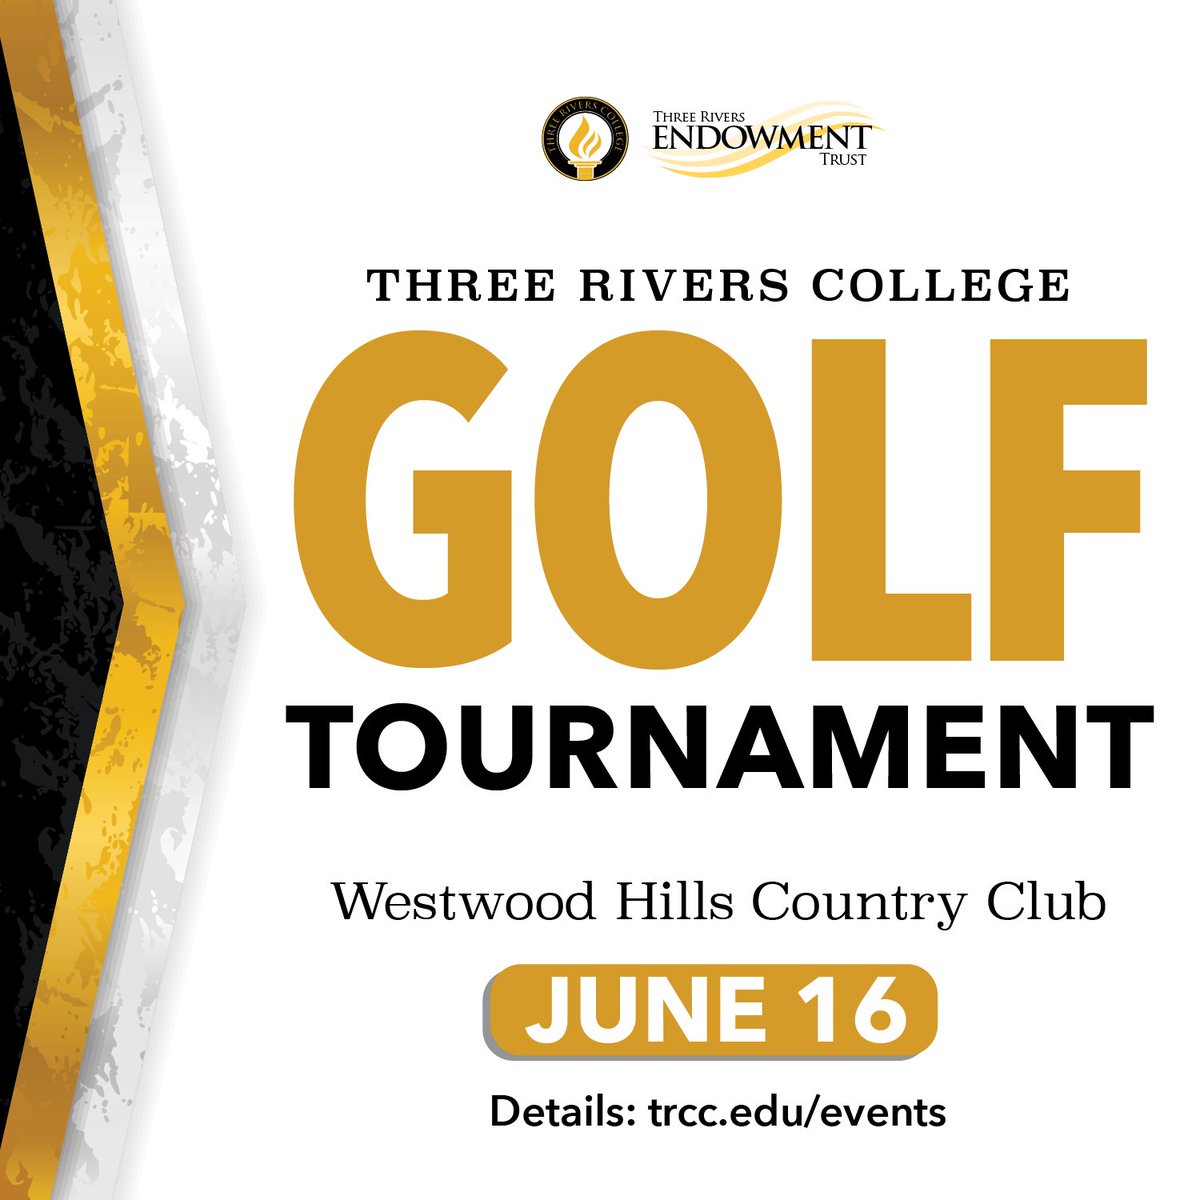 Join the Three Rivers Endowment Trust for its 10th Annual Golf Tournament on June 16, at Westwood Hills Country Club in Poplar Bluff. This 4-person scramble kicks off with lunch at noon and ends with awards and a shrimp boil that evening. Details: trcc.edu/events/2023-th…